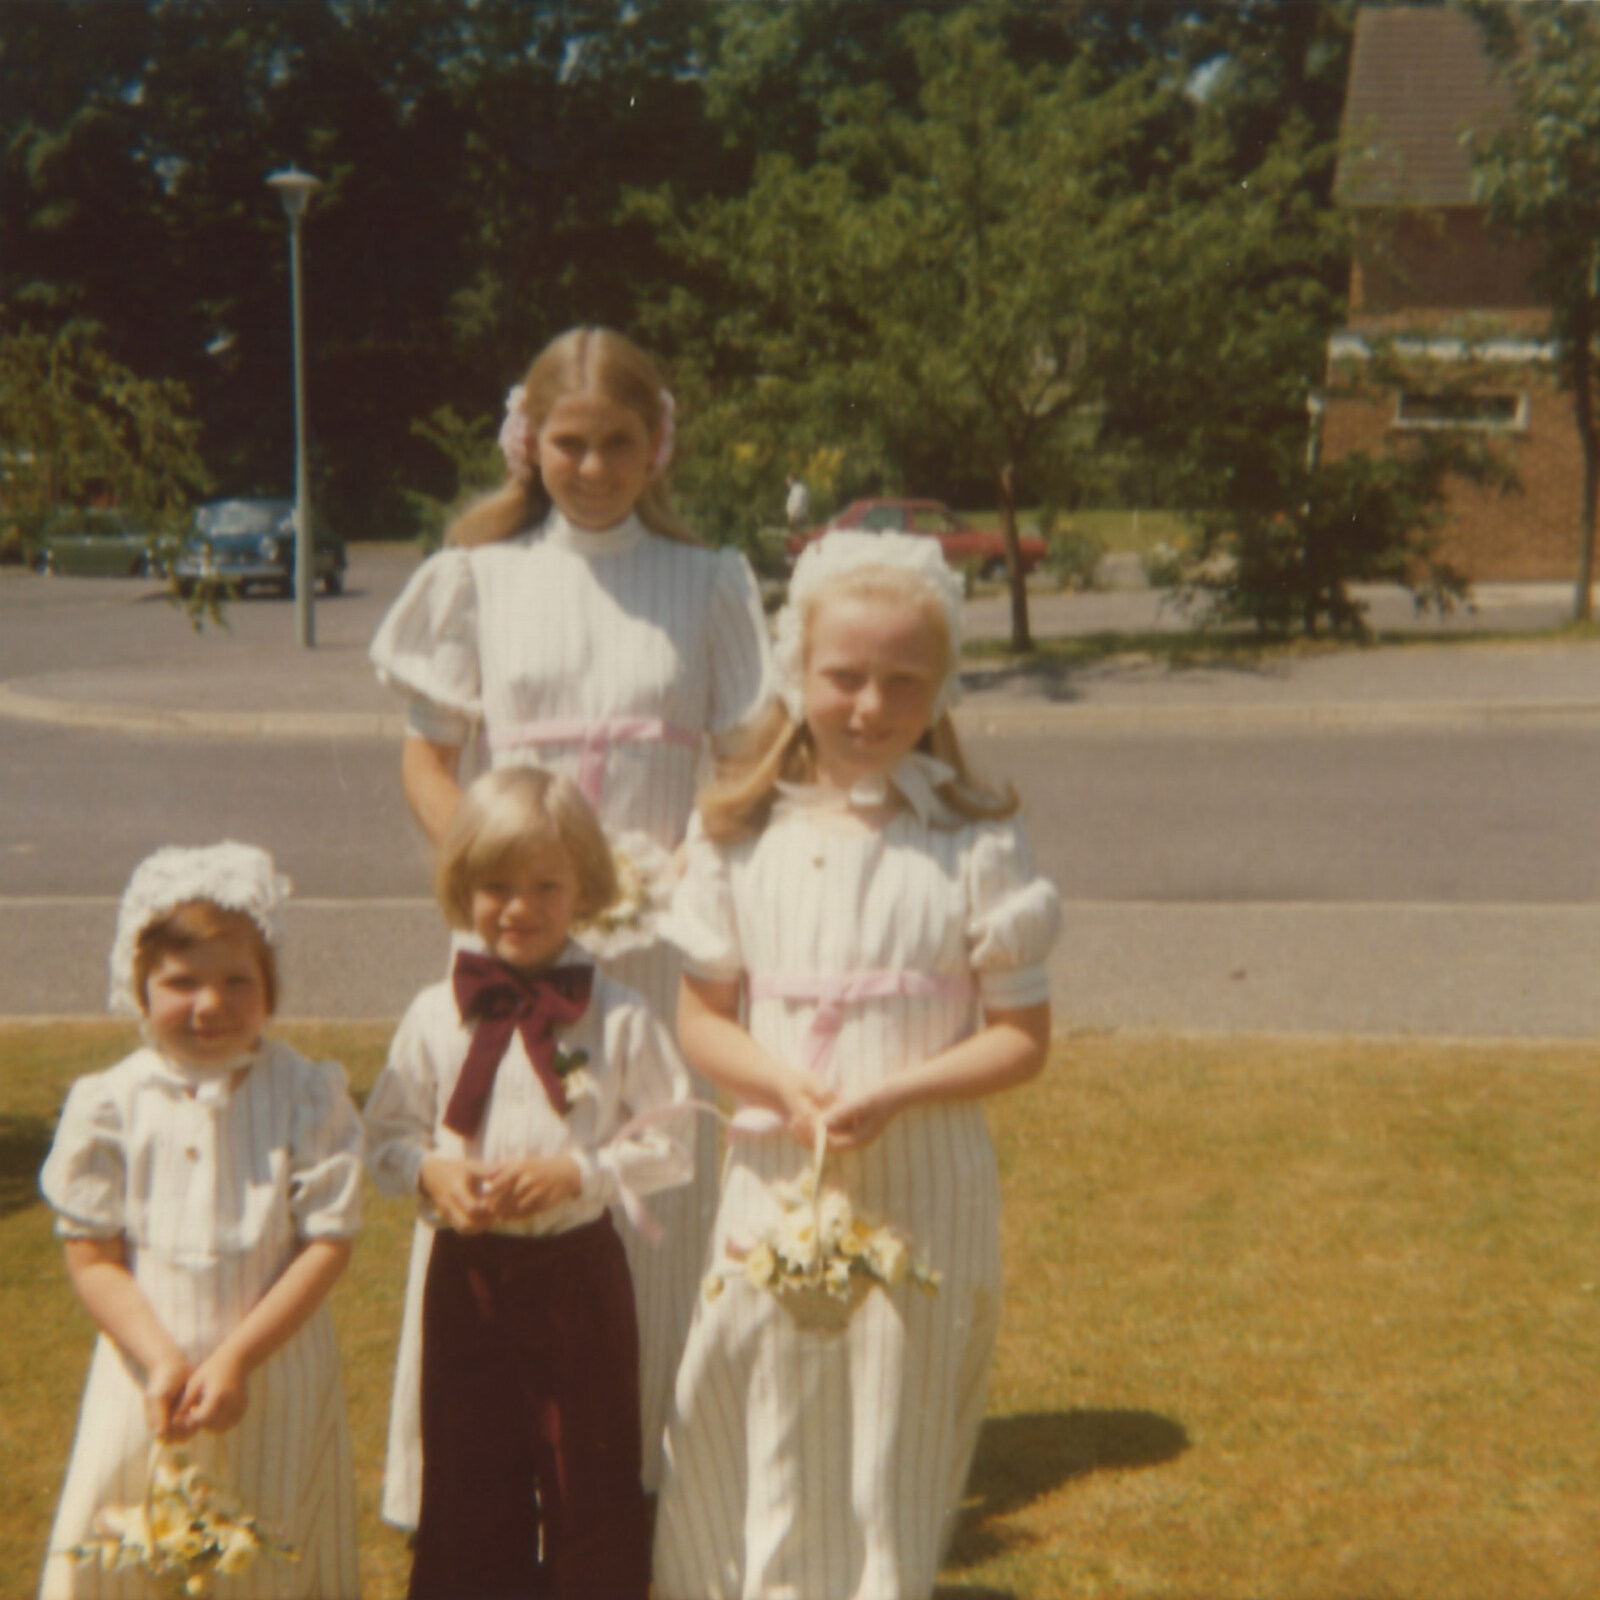 Family History: The 1970s, Timperley and Sandbach, Cheshire - 24th January 2020: Bridesmaids and pageboy